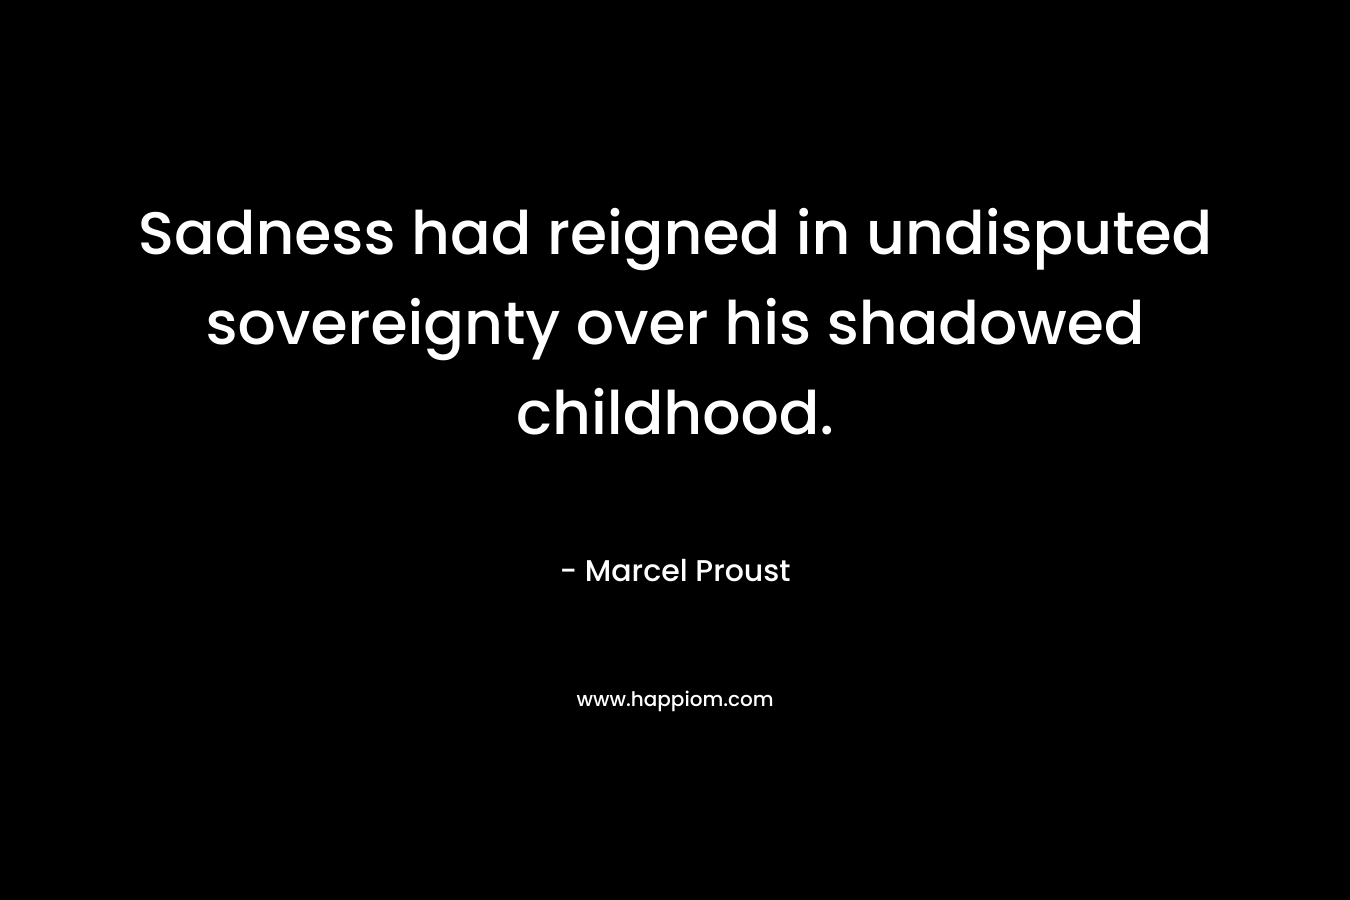 Sadness had reigned in undisputed sovereignty over his shadowed childhood. – Marcel Proust